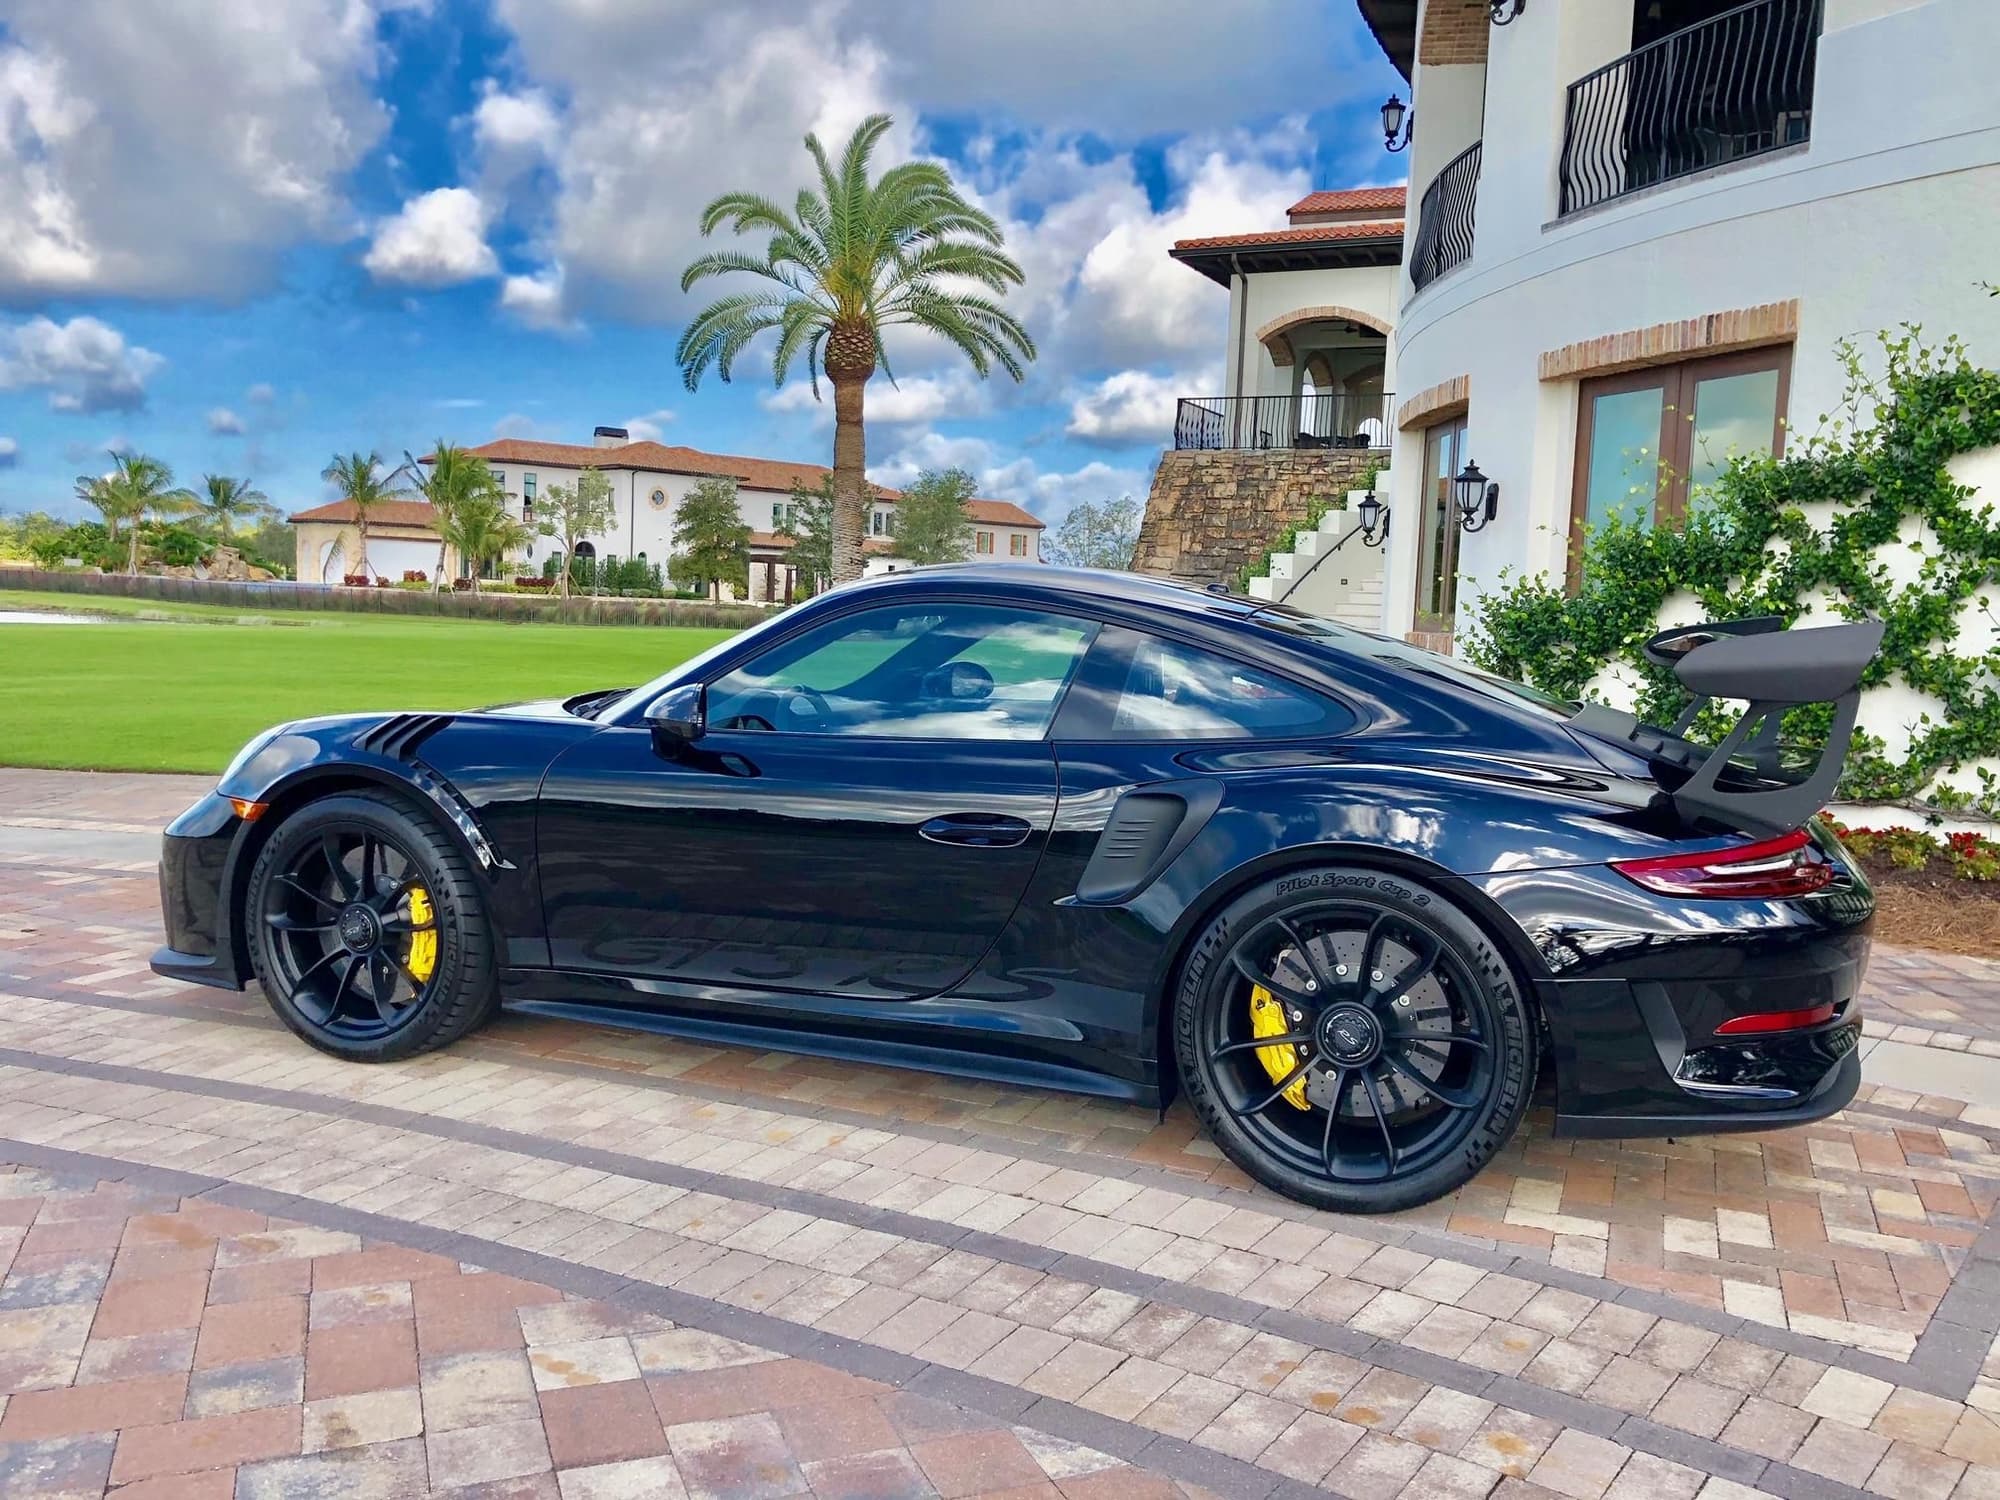 2019 Porsche GT3 - 2019 Porsche 911 GT3 RS (Weissach Package) - New - VIN WP0AF2A99KS164592 - 16 Miles - 6 cyl - 2WD - Automatic - Coupe - Black - Fort Lauderdale, FL 33311, United States